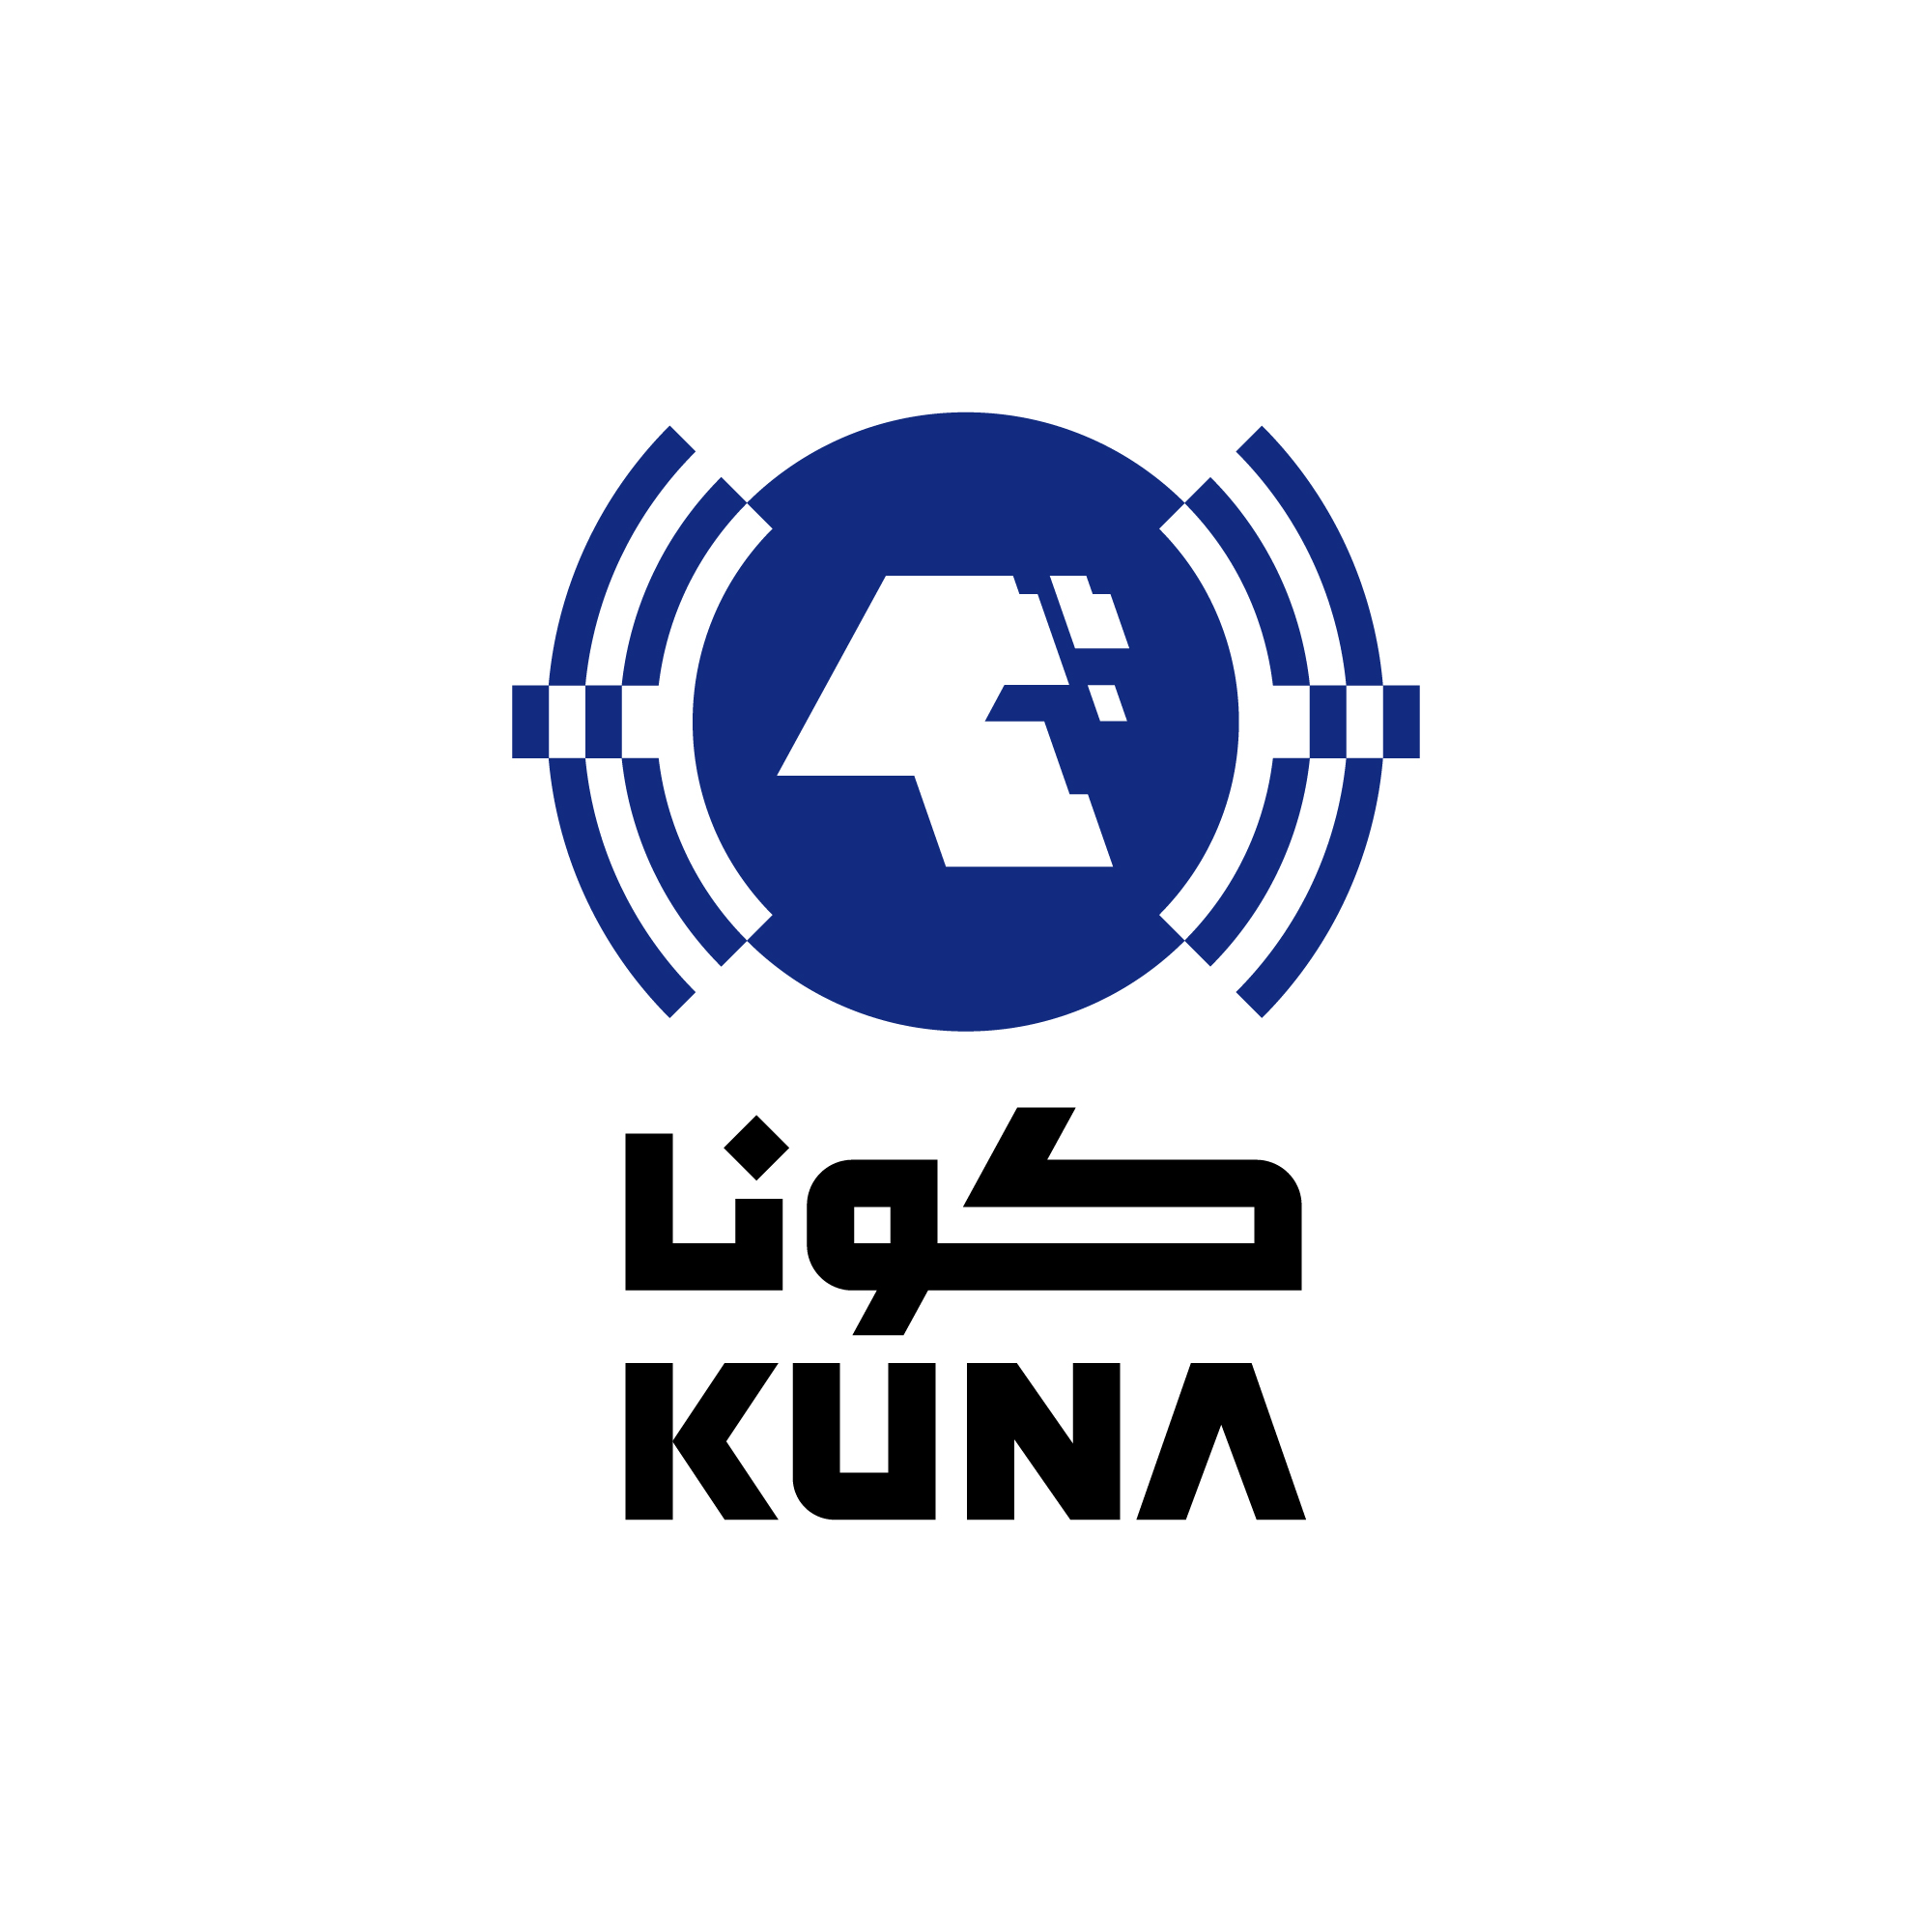 Briefing of KUNA main news for Friday until 00:00 GMT